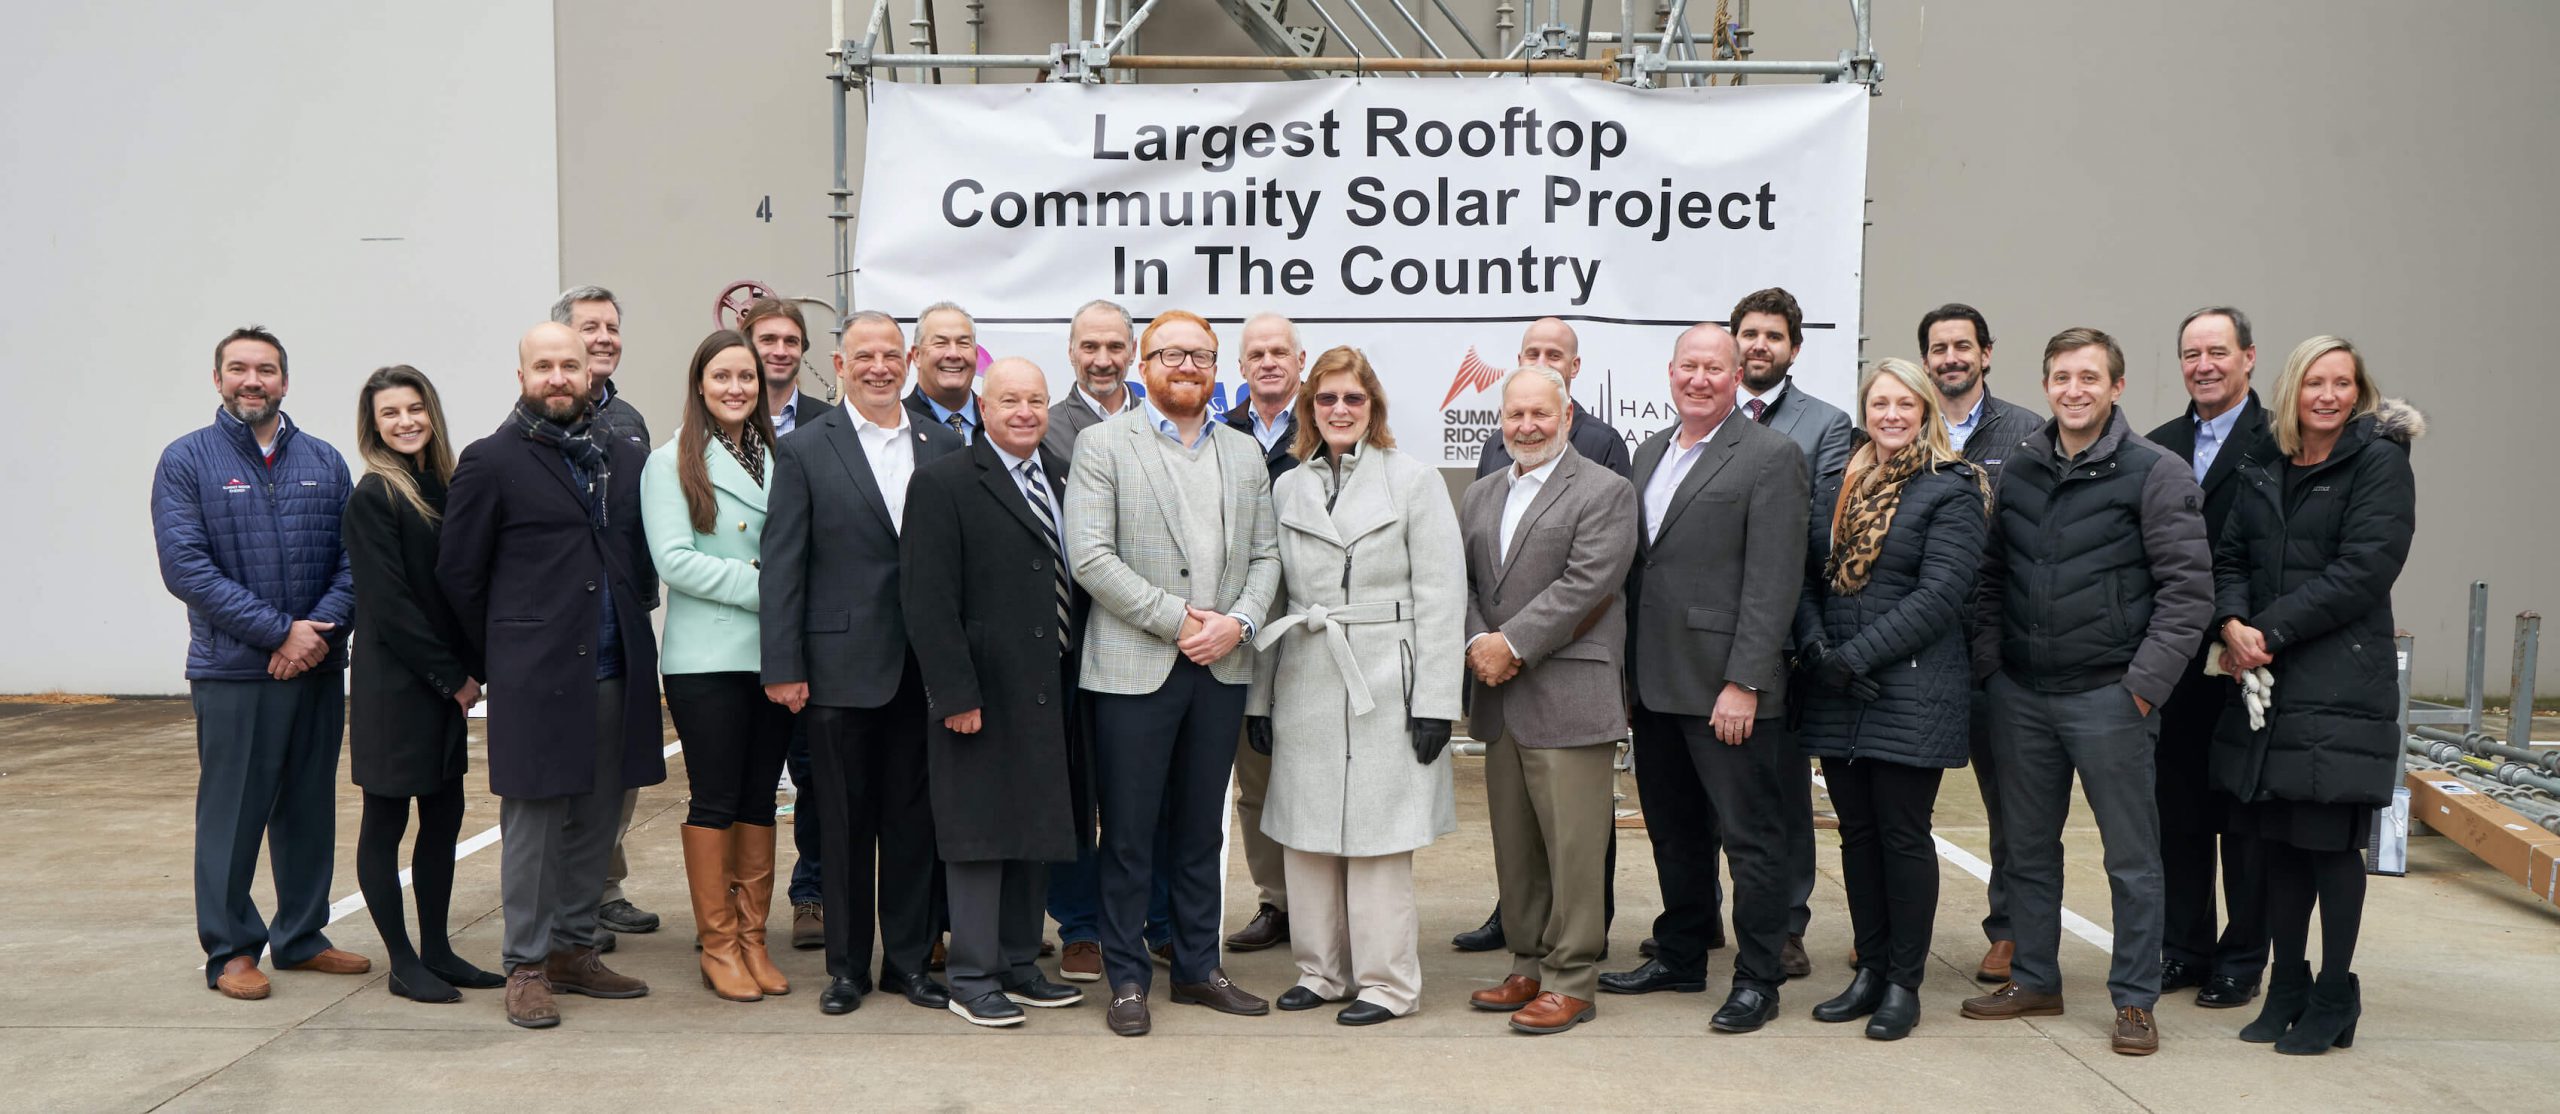 PV Magazine: Summit Ridge Energy to develop six rooftop community solar projects in Maryland